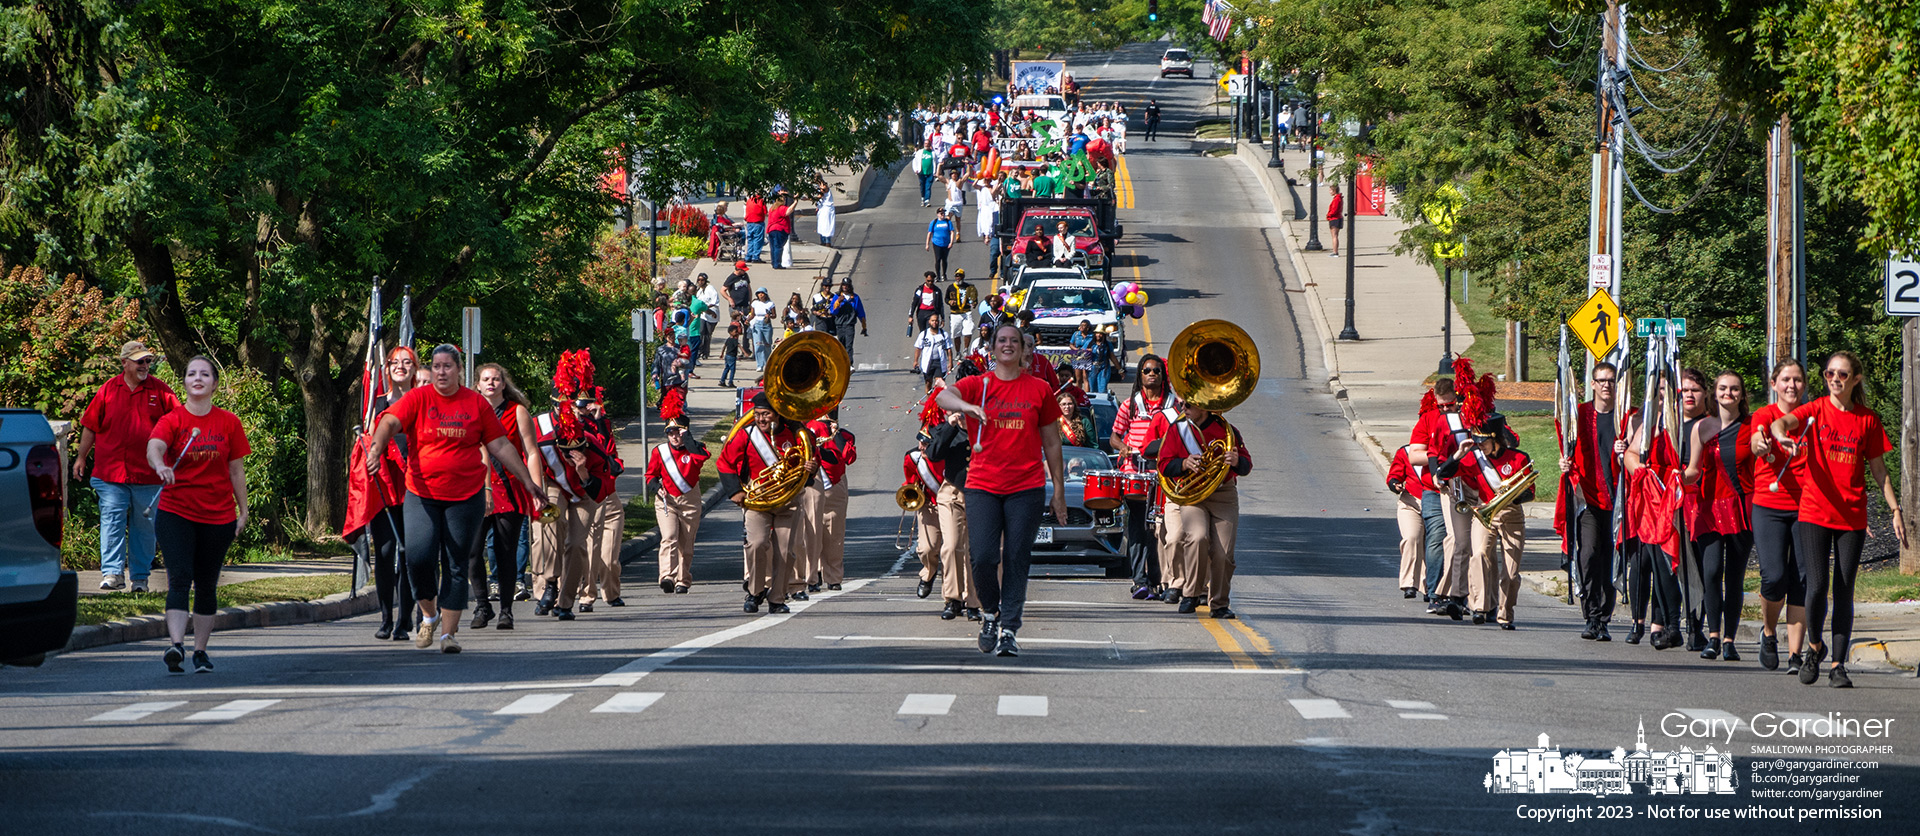 The Otterbein Marching Band leads the school's homecoming parade across the Main Street bridge toward Grove Street for the final procession through campus before ending near the football field for the afternoon game. My Final Photo for September 16, 2023.